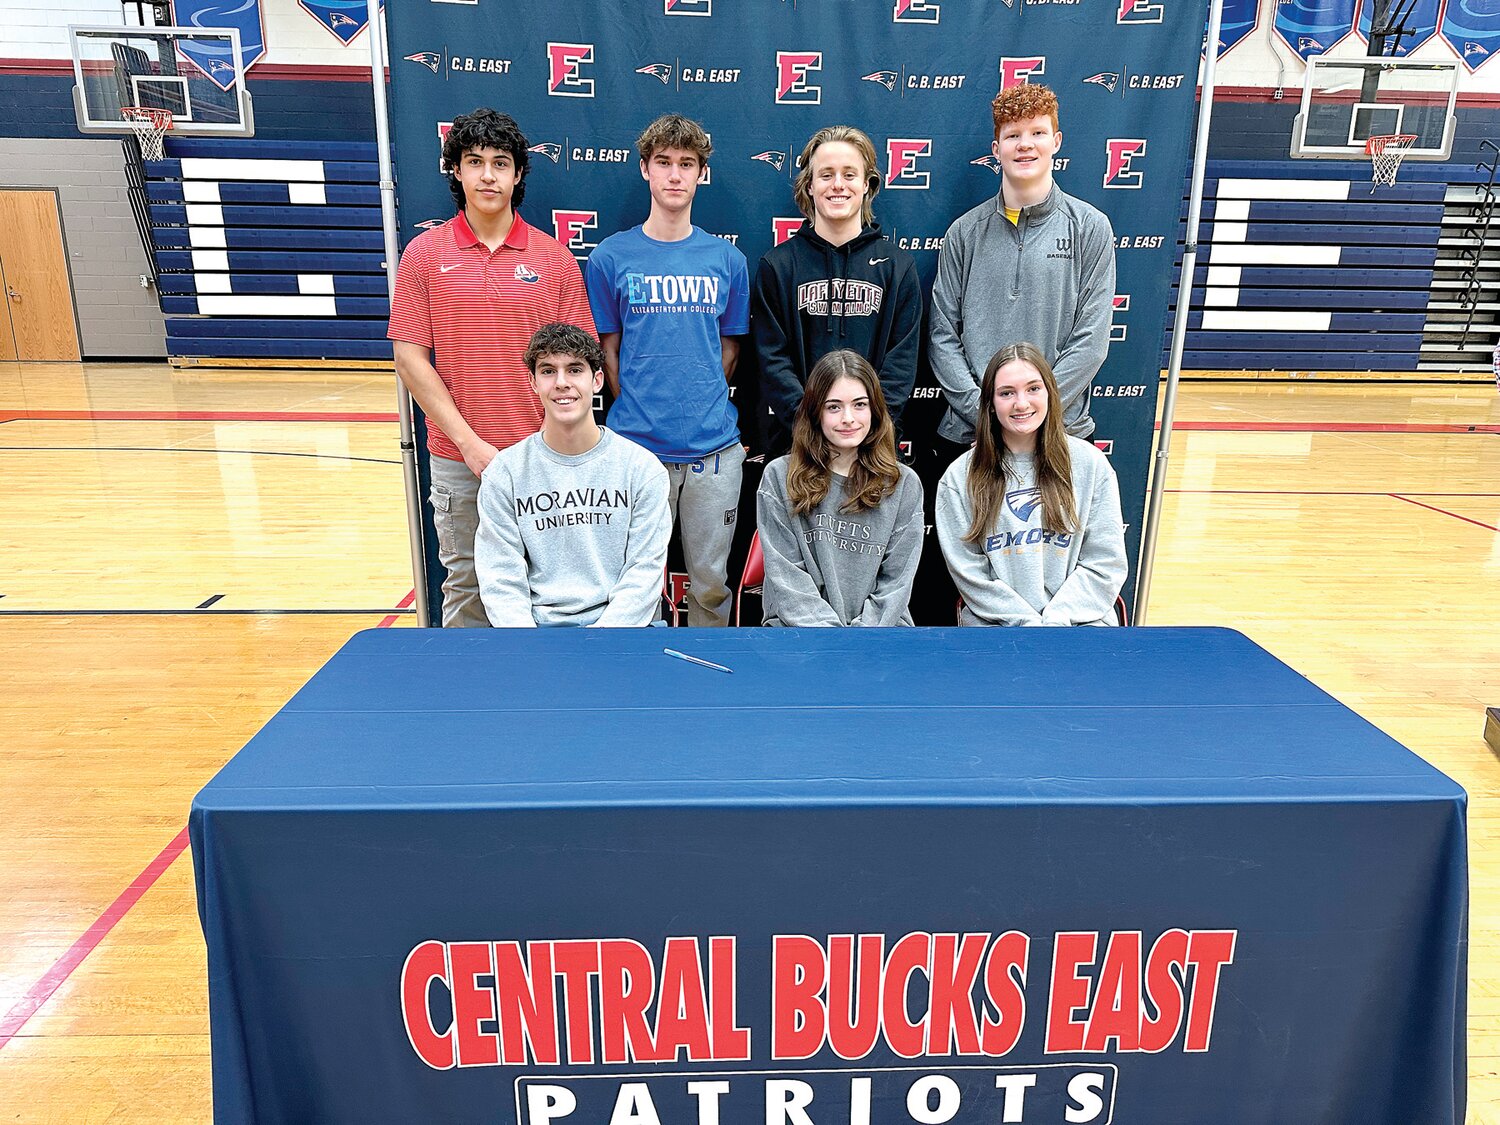 Central Bucks East recently recognized seven seniors for their commitment to compete in collegiate sports. From left are: front row, Joey Roth, Ava DePrizio, Melayna Pettigrew; back row, Thomas Cano-Piszel, Nick Raysky, Owen Lever and Damian Frayne.